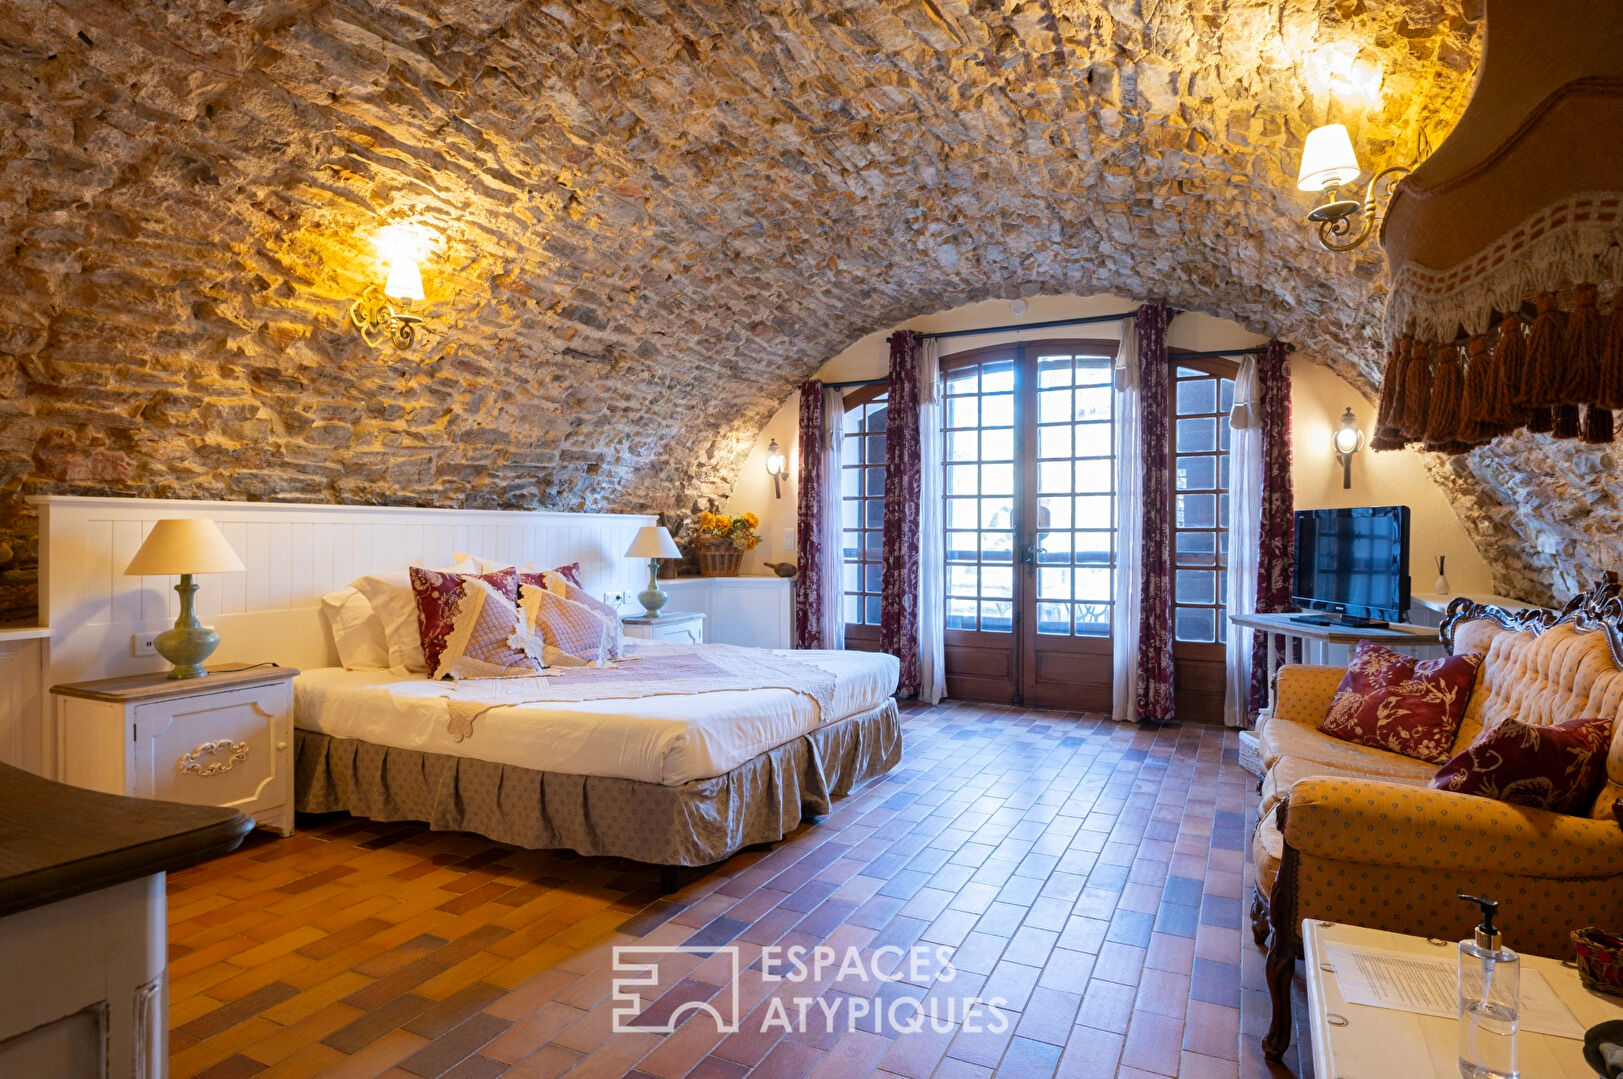 Historic bastide in a privileged area with swimming pool, gardian house and tennis court